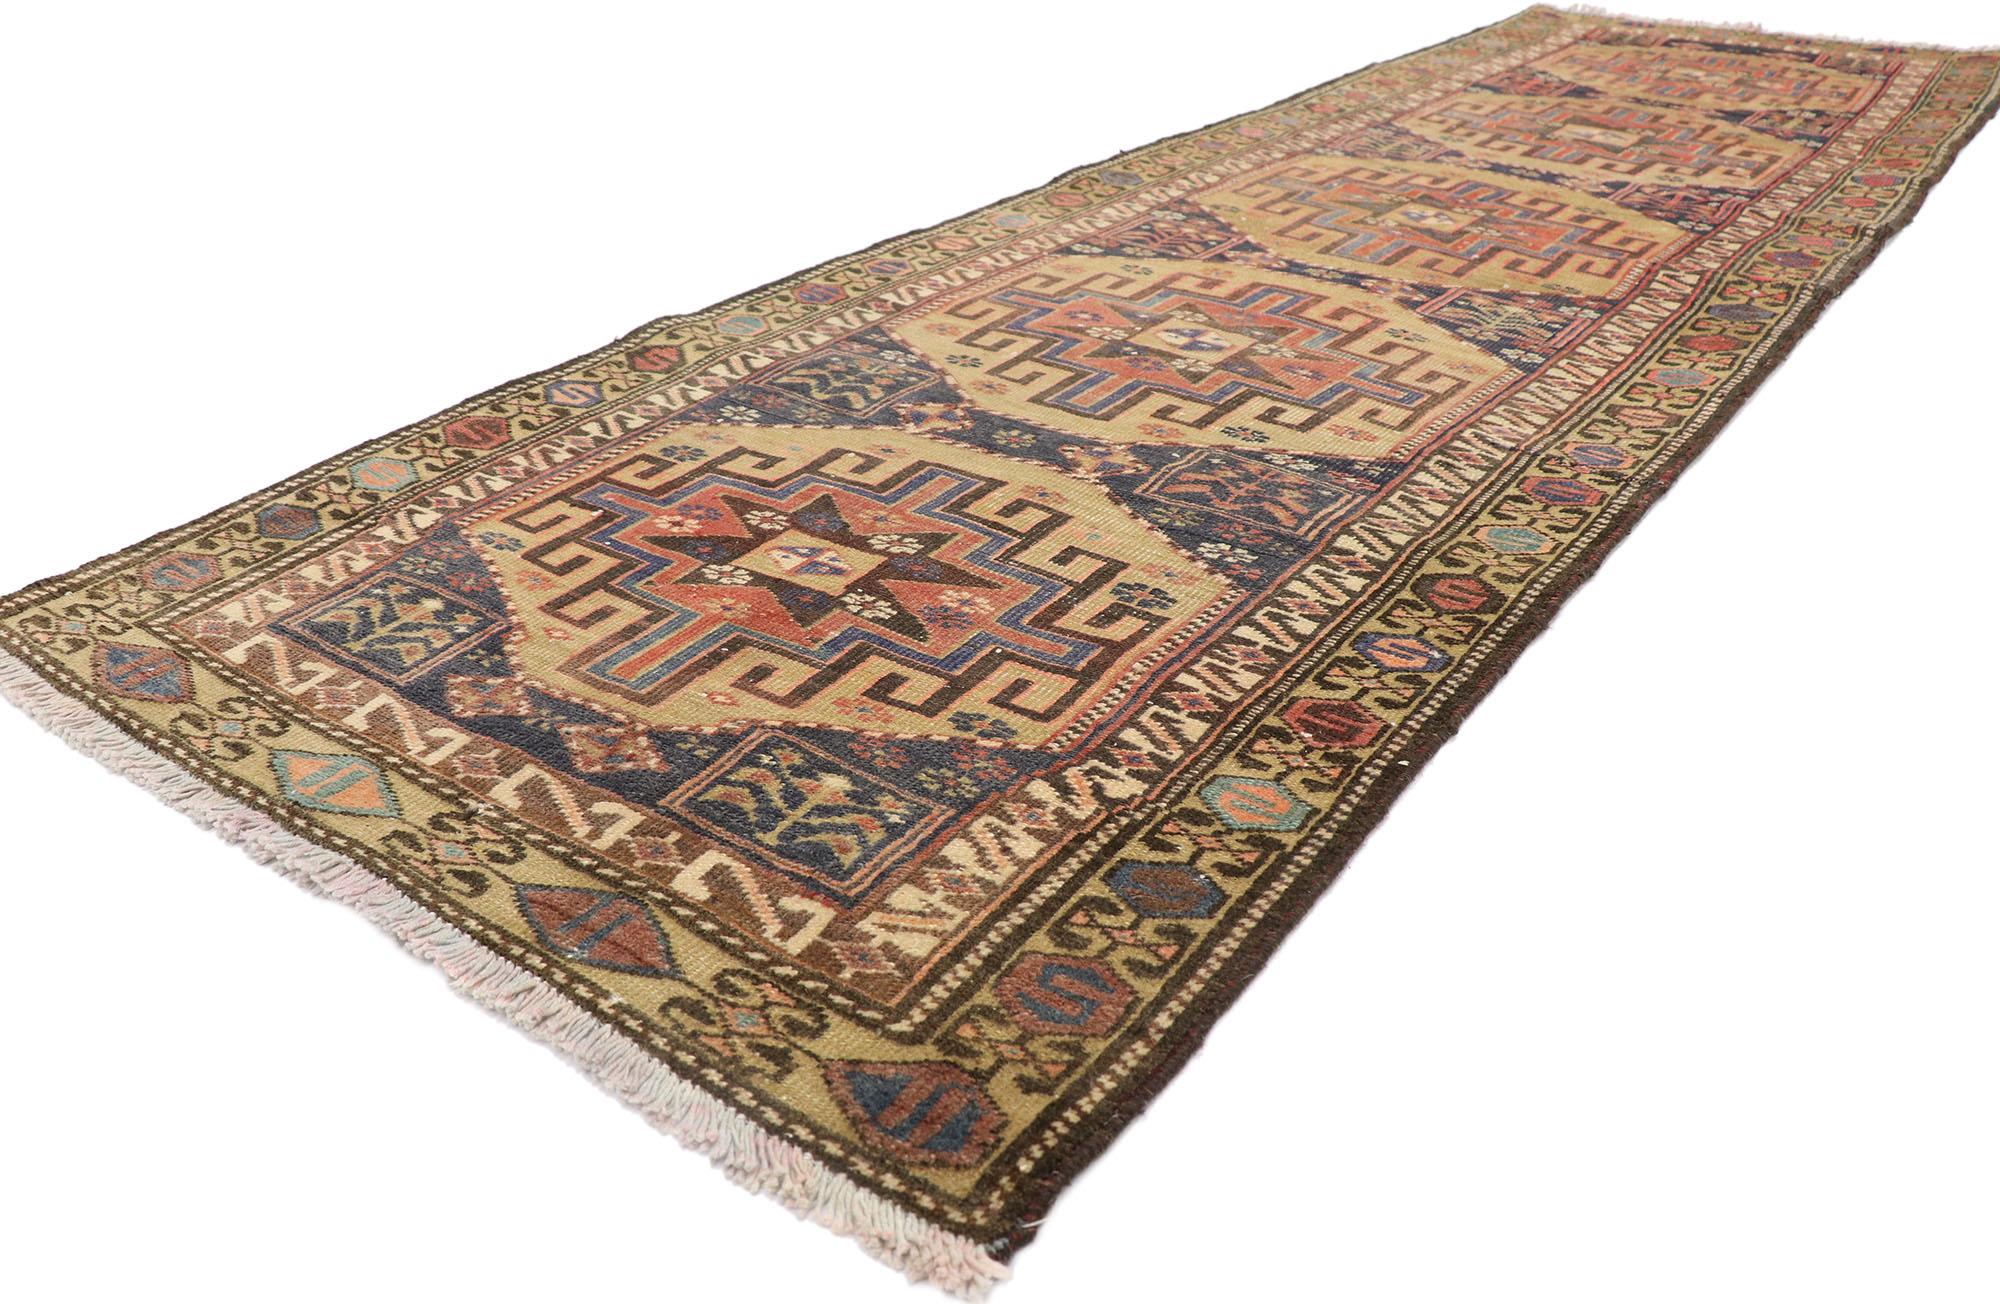 60945 Antique Persian Malayer Runner with Masculine Tribal Style 03'01 x 09'08. Warm and inviting with a bold tribal design with rustic sensibility, this hand-knotted wool antique Persian Azerbaijan runner is poised to impress. The abrashed brown